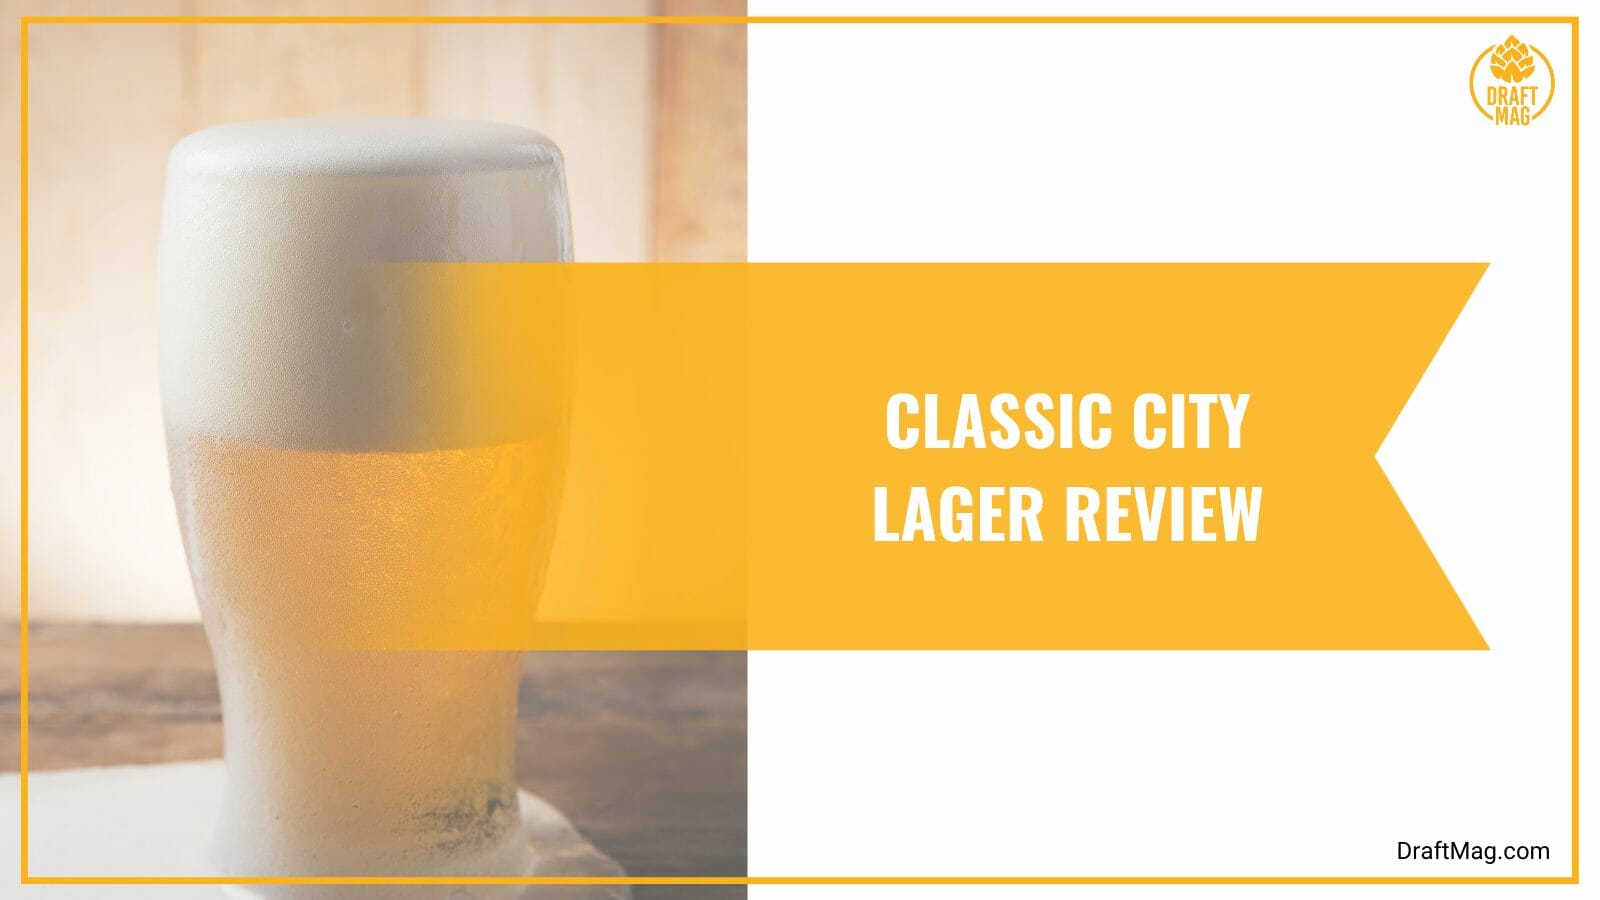 Classic city lager review